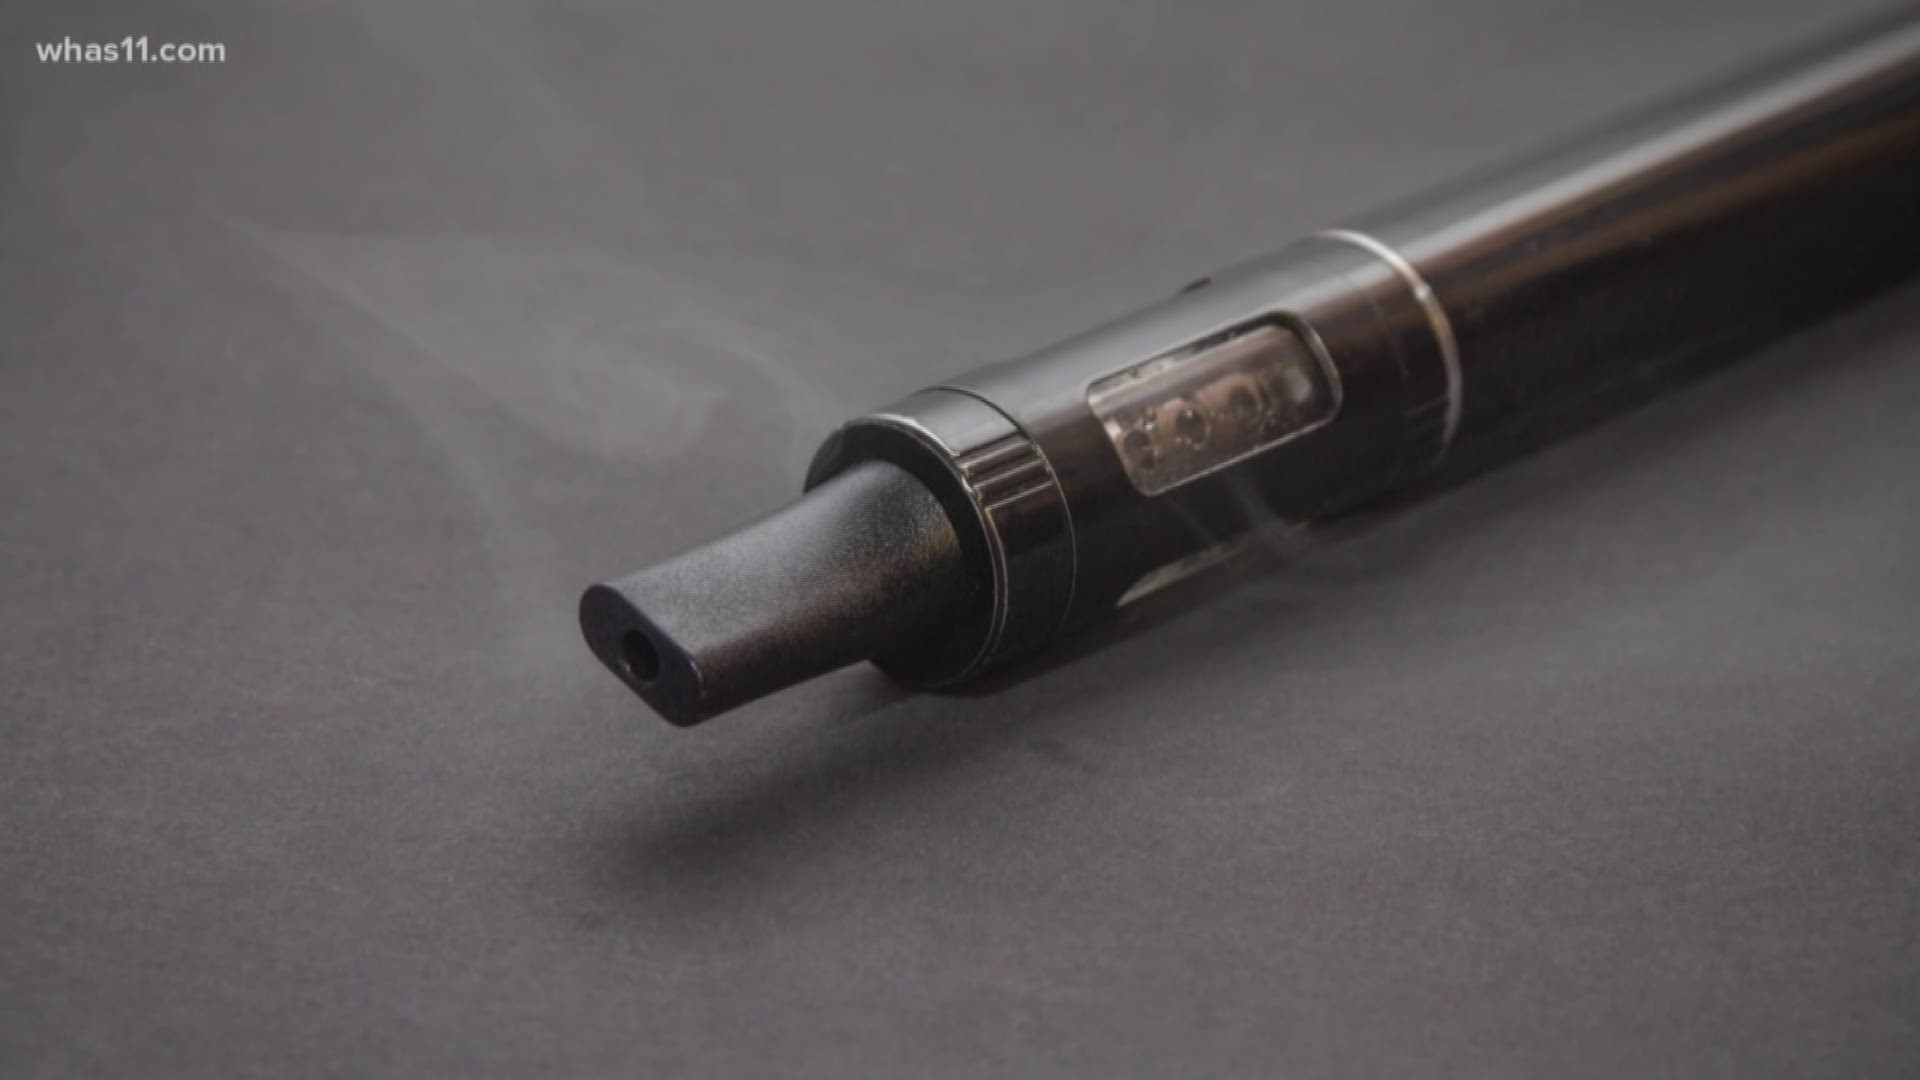 Starting Tuesday, the state is asking doctors to report when they notice symptoms in teens or young adults with a history of vaping.